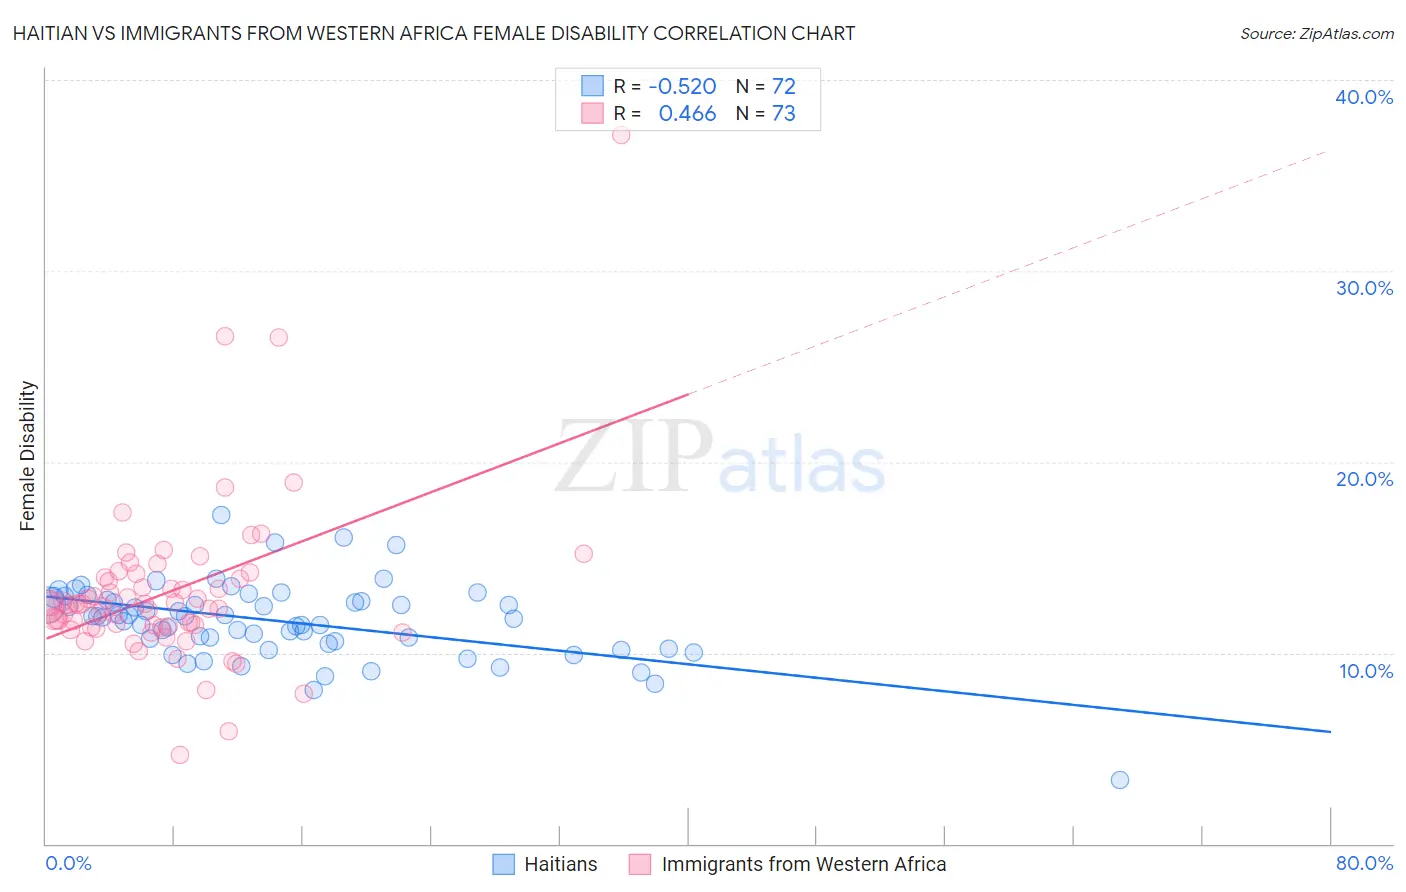 Haitian vs Immigrants from Western Africa Female Disability